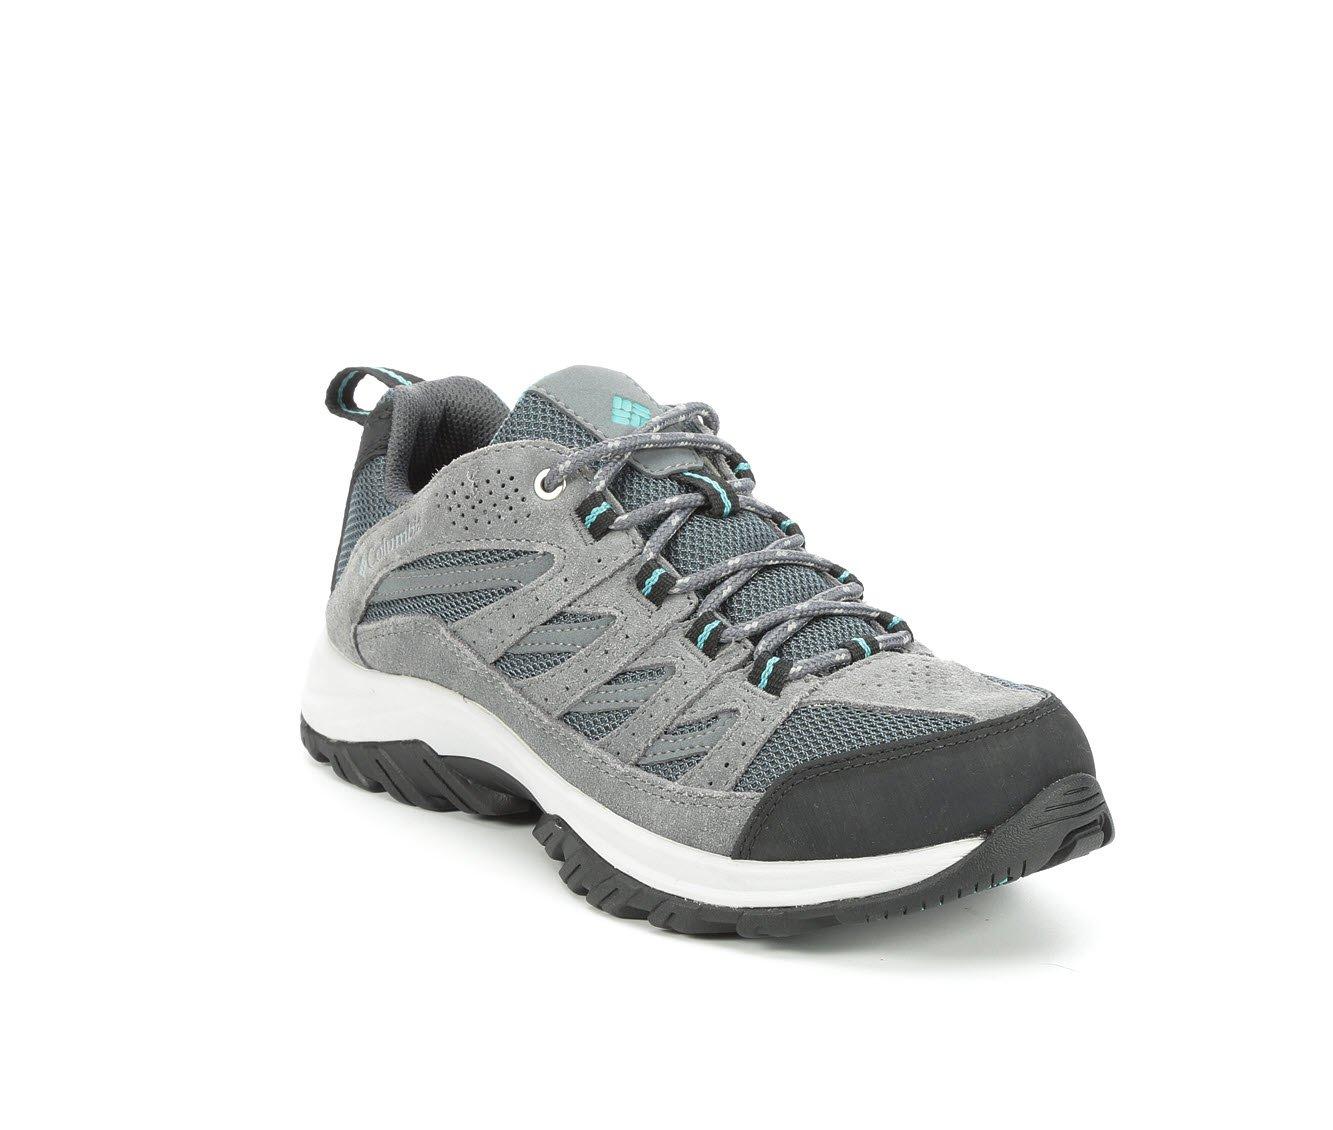 Women's Columbia Crestwood Low Hiking Shoes | Shoe Carnival